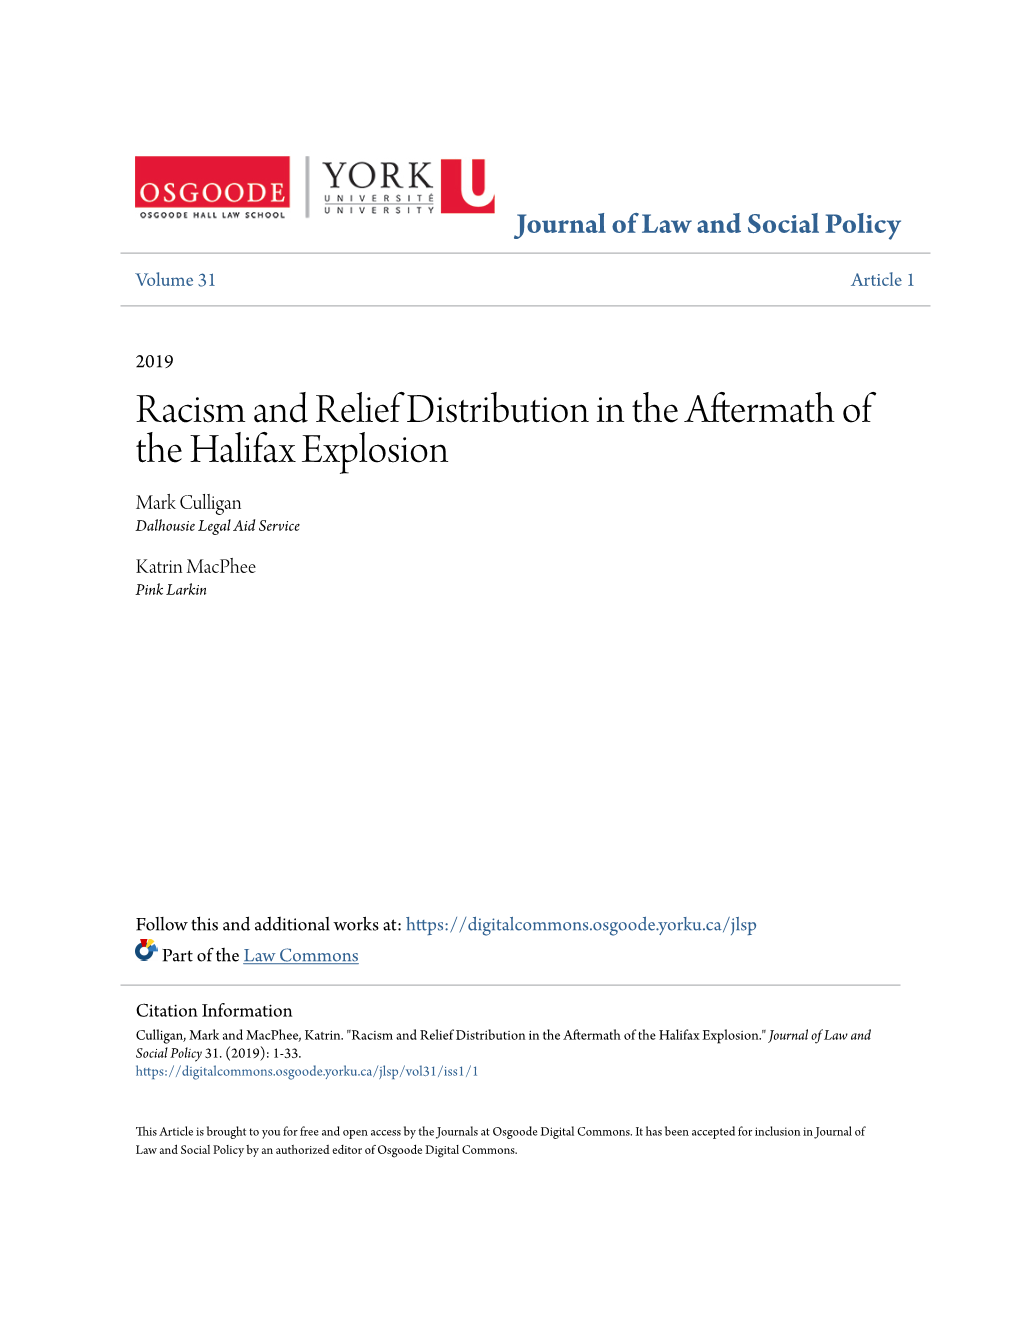 Racism and Relief Distribution in the Aftermath of the Halifax Explosion Mark Culligan Dalhousie Legal Aid Service